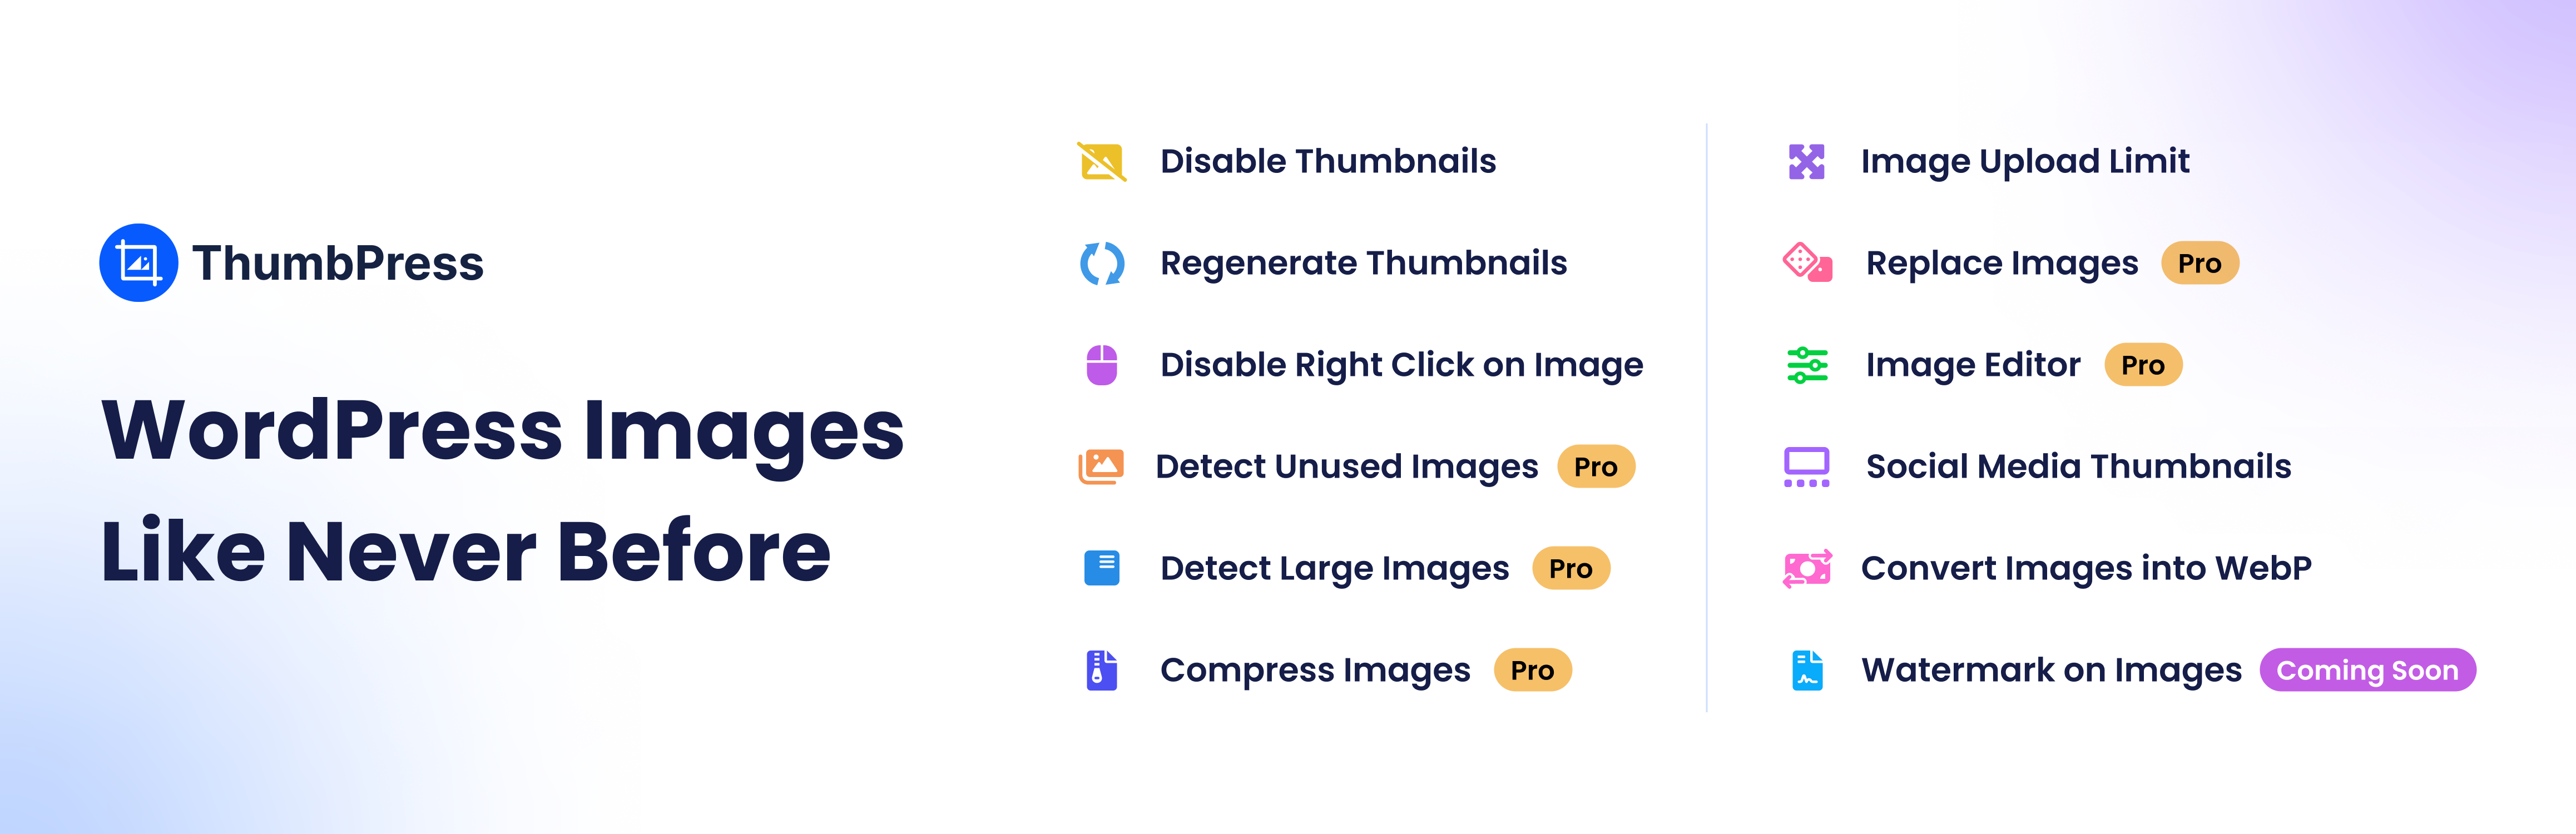 ThumbPress – Disable Thumbnails, Regenerate Thumbnails, Optimize Images, Convert to WebP, Disable Right Click, Compress Images, Image Editor & More